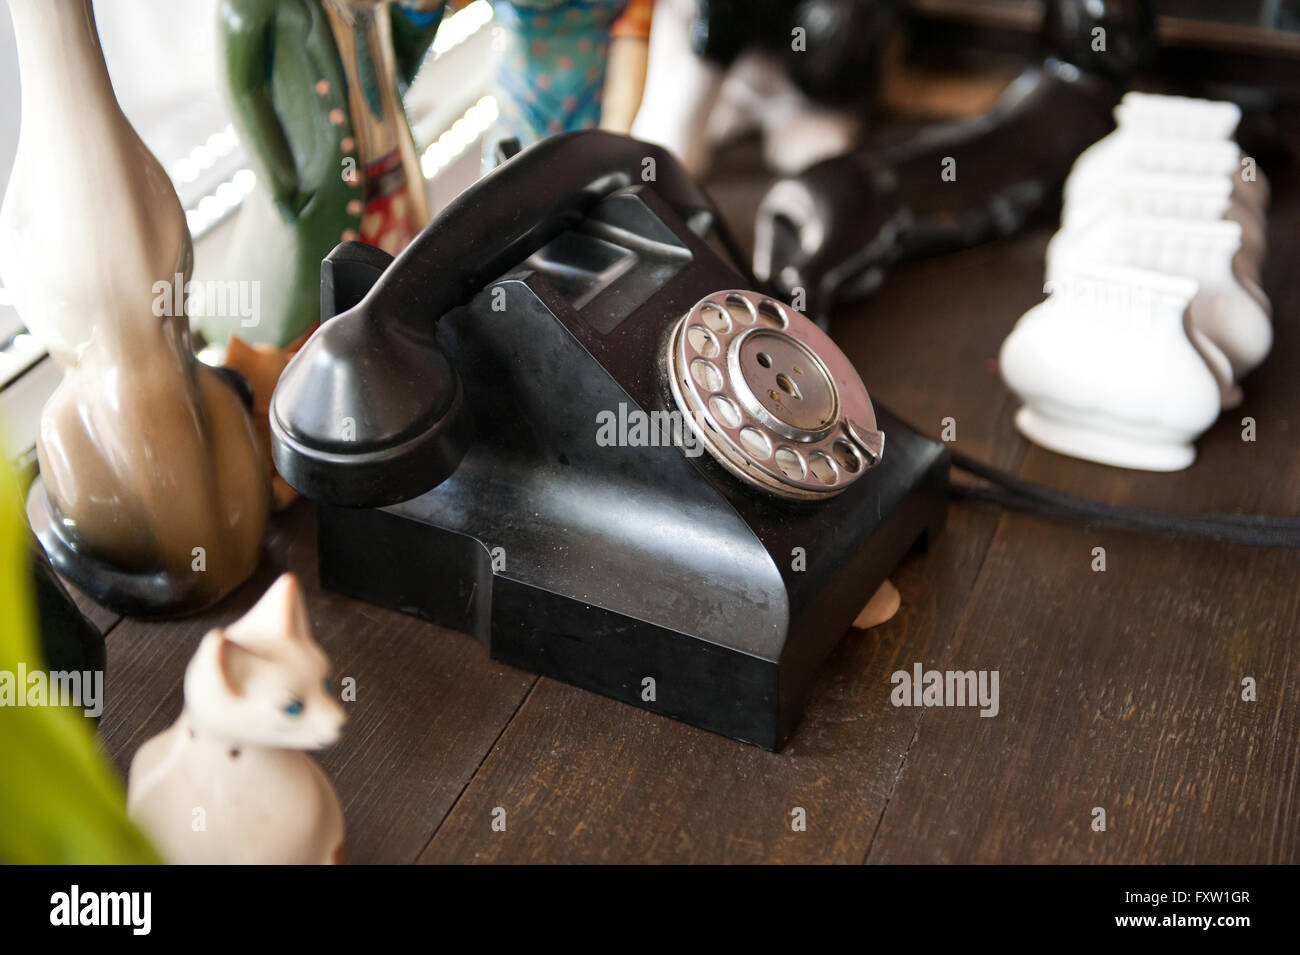 Old retro black telephone with rotary dial in Jacobsen Restaurant interior in Gdansk, Poland, Europe, windowsill decorations Stock Photo